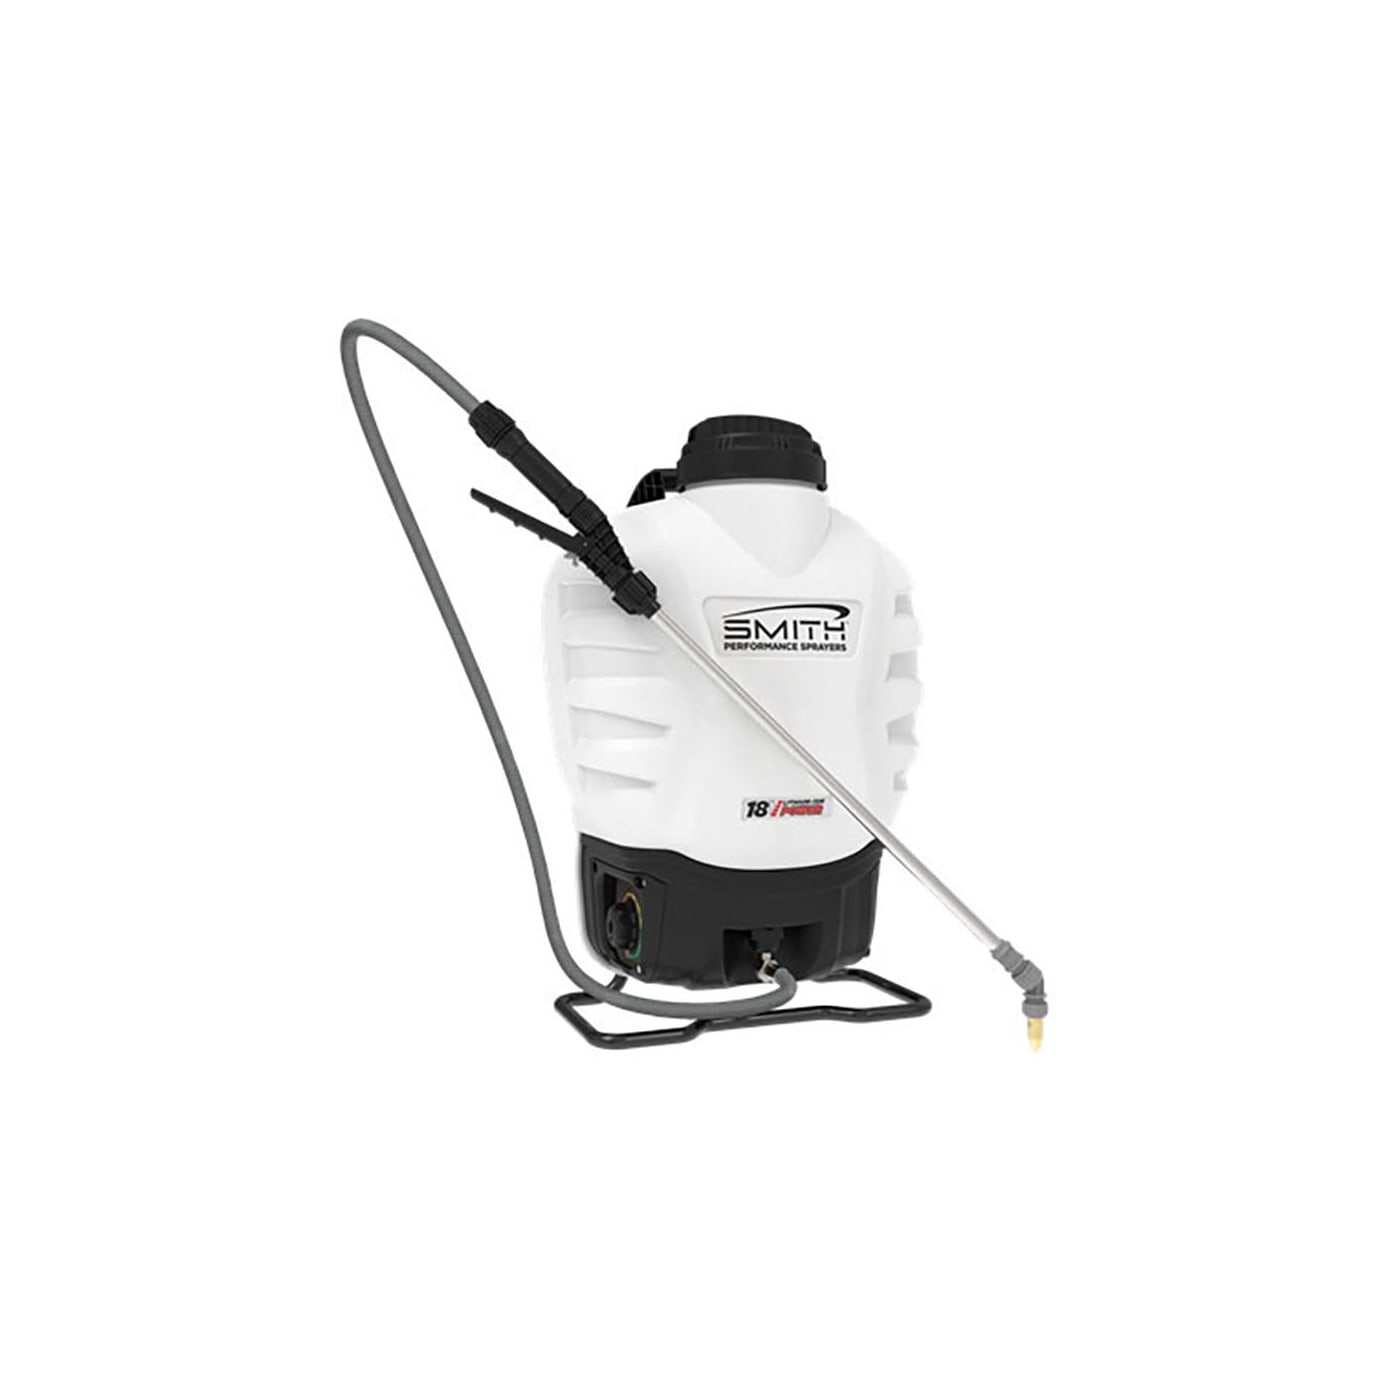 SMITH VARIABLE FLOW BACKPACK SPRAYER